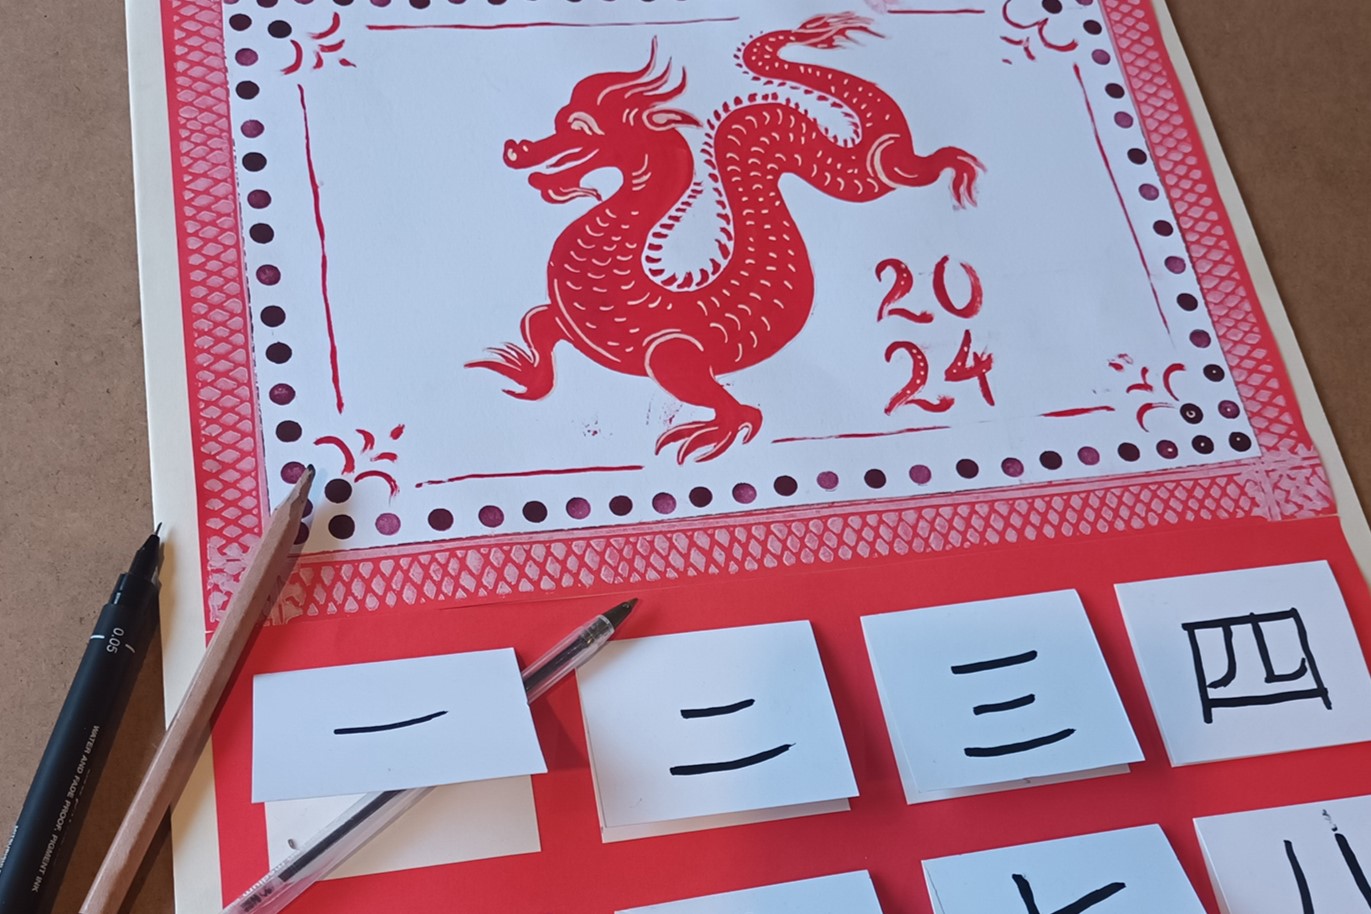 A picture of a Chinese date planner in red and white with a drawn dragon in the centre and 4 square white boxes with simple black lines on across the bottom